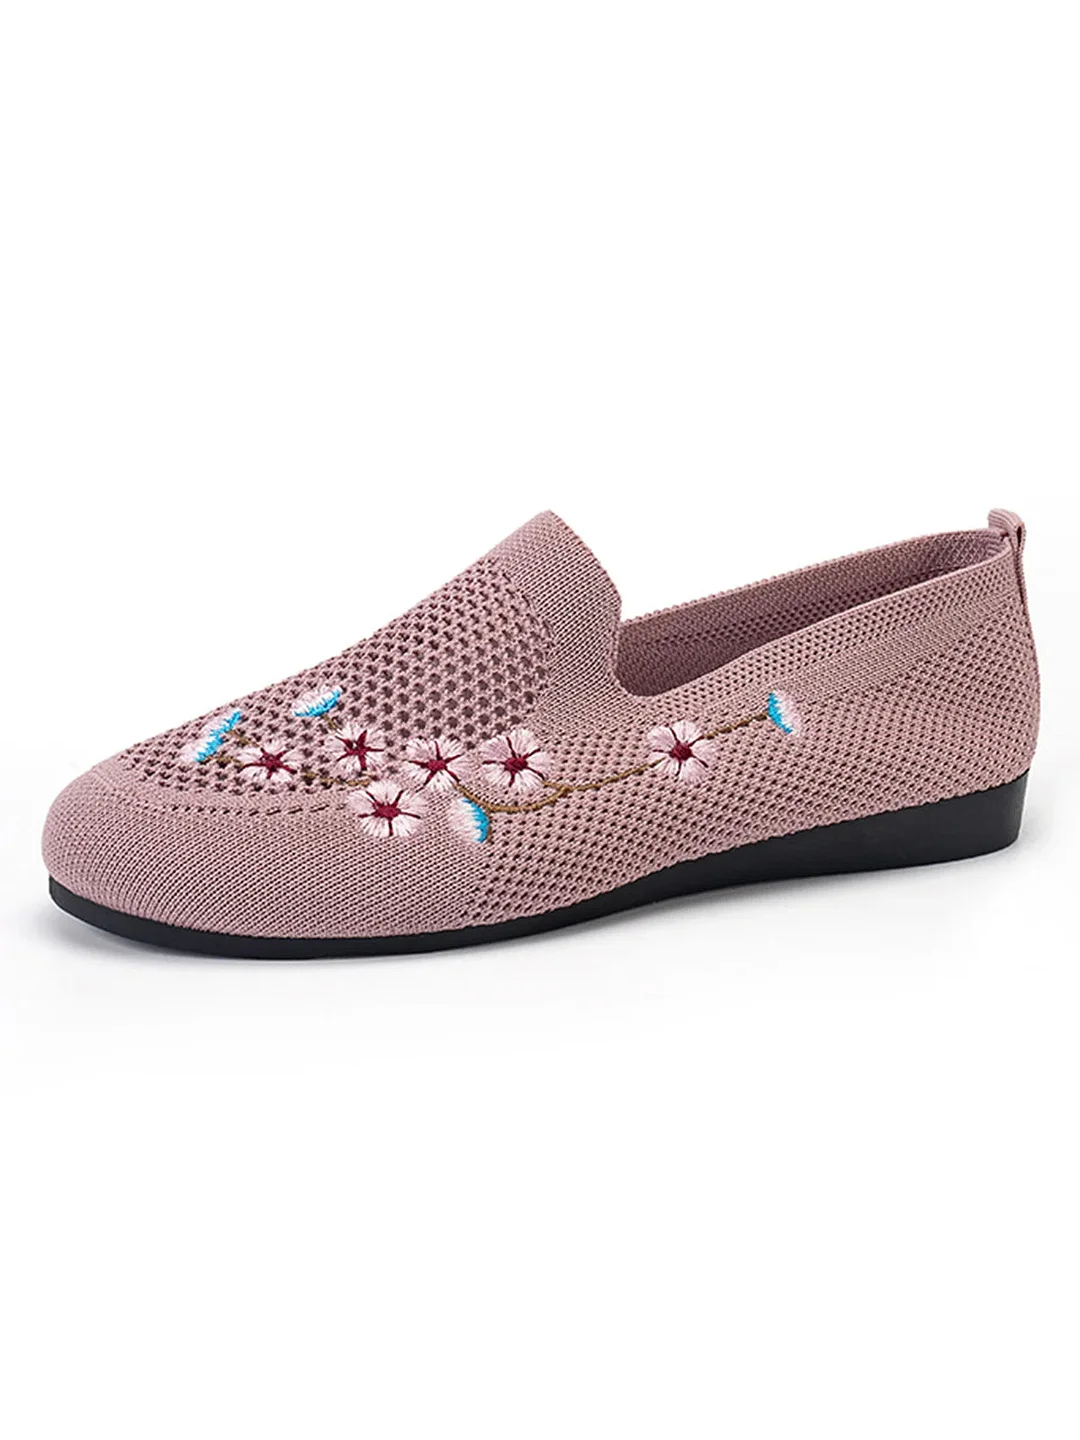 Women plus size clothing Floral Embroidery Breathable Mesh Fabric Flat Loafers-Nordswear